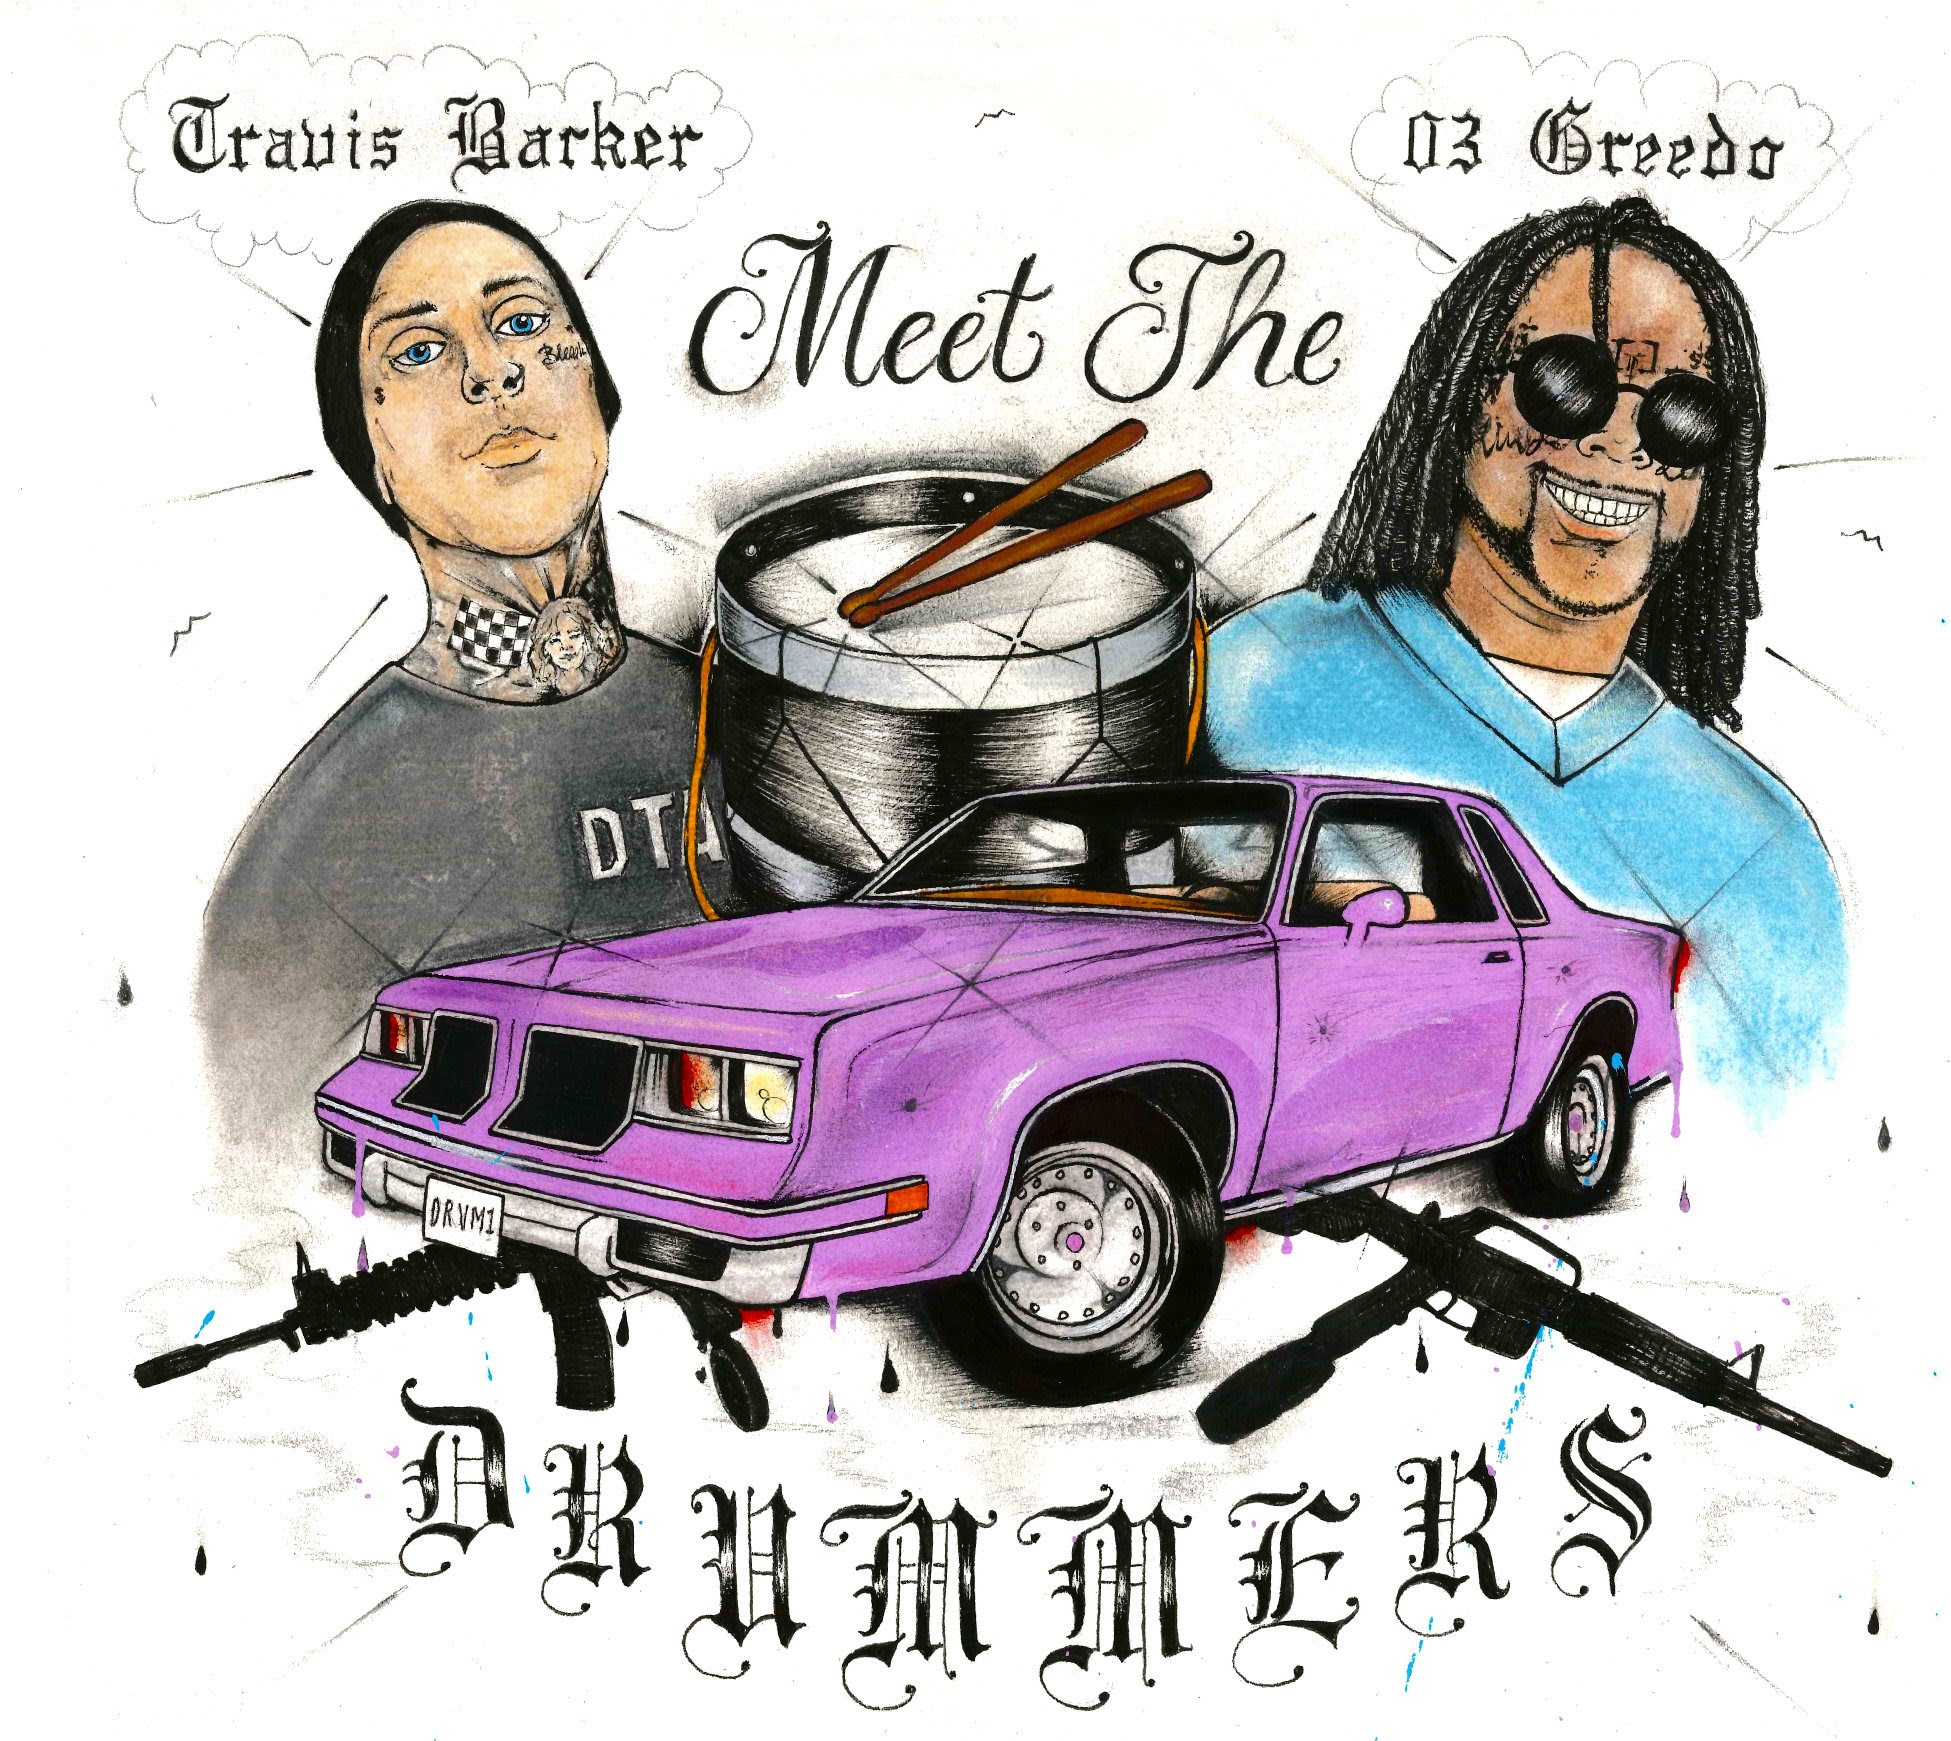 03 Greedo and Travis Barker Announce <i></noscript>Meet the Drummers</i> EP, Release “Cellout”” title=”unnamed-31-1562167889″ data-original-id=”332978″ data-adjusted-id=”332978″ class=”sm_size_full_width sm_alignment_center ” data-image-use=”multiple_use” data-image-source=”video_screenshot” />
</div>
</div>
</div>
</div>
</div>
</section>
<section data-particle_enable=